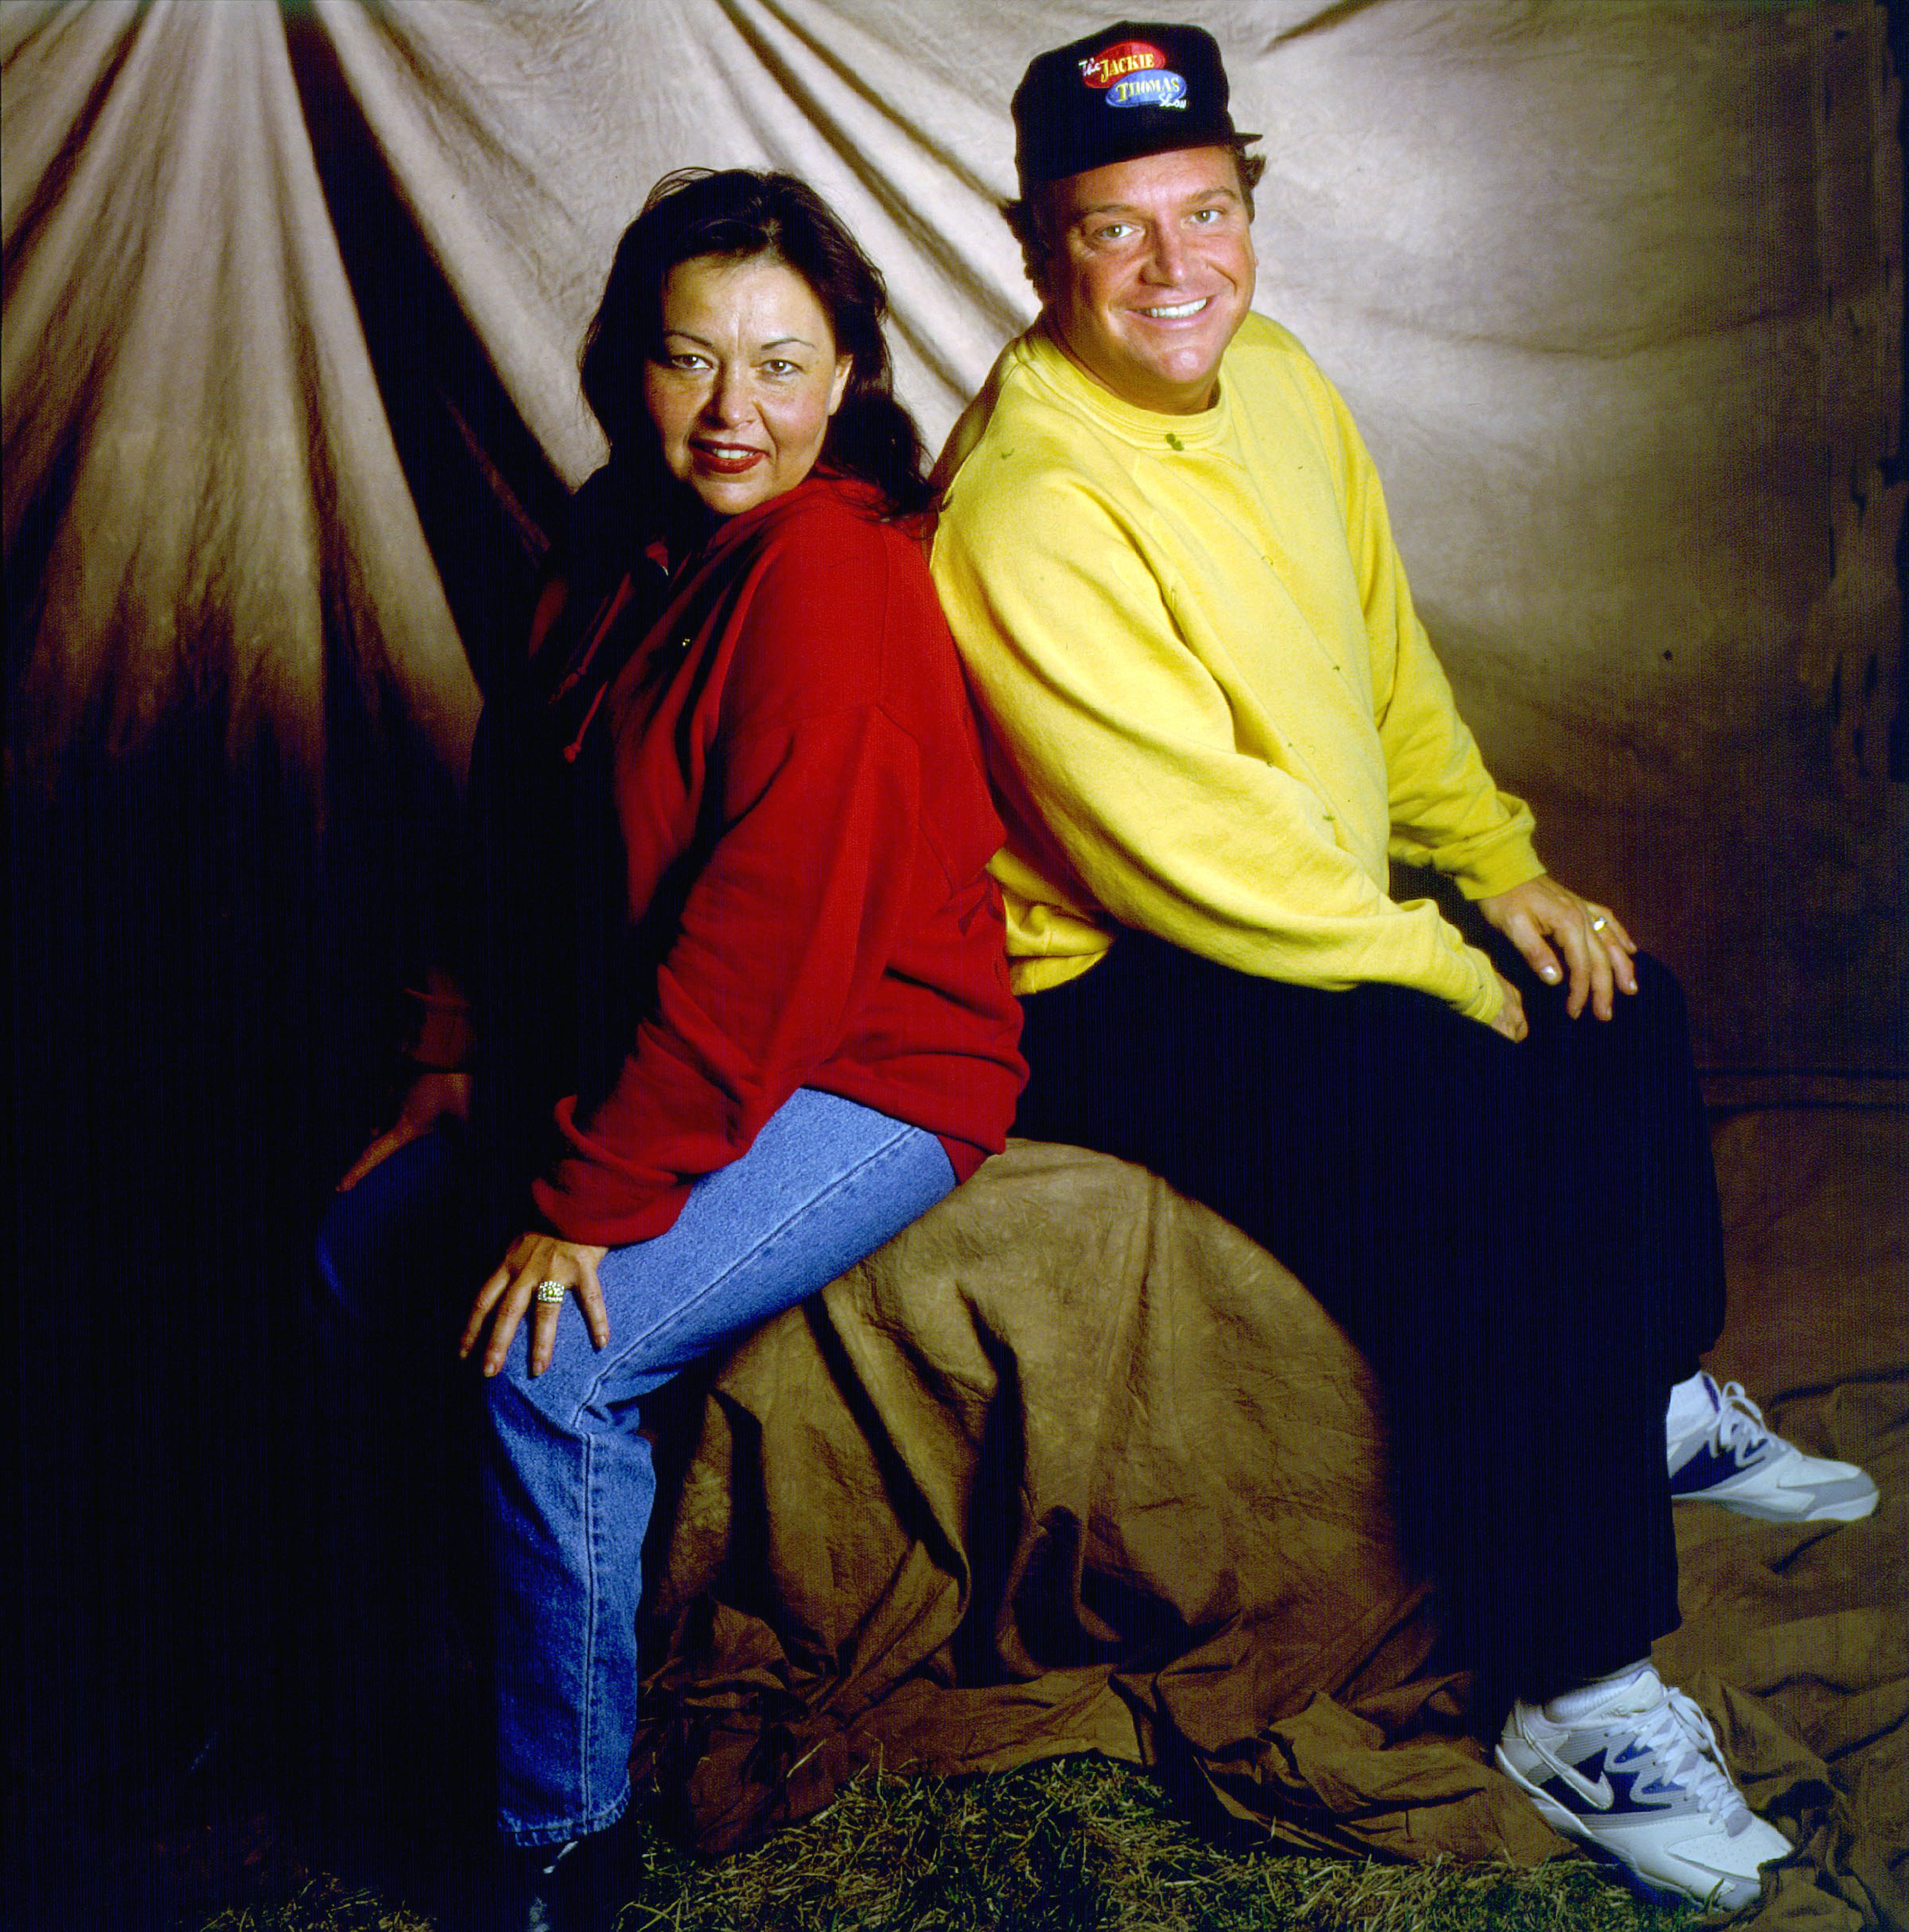 Roseanne Barr and Tom Arnold backstage at Farm Aid, Ames, Iowa , March 14, 1992 | Photo: Getty Images